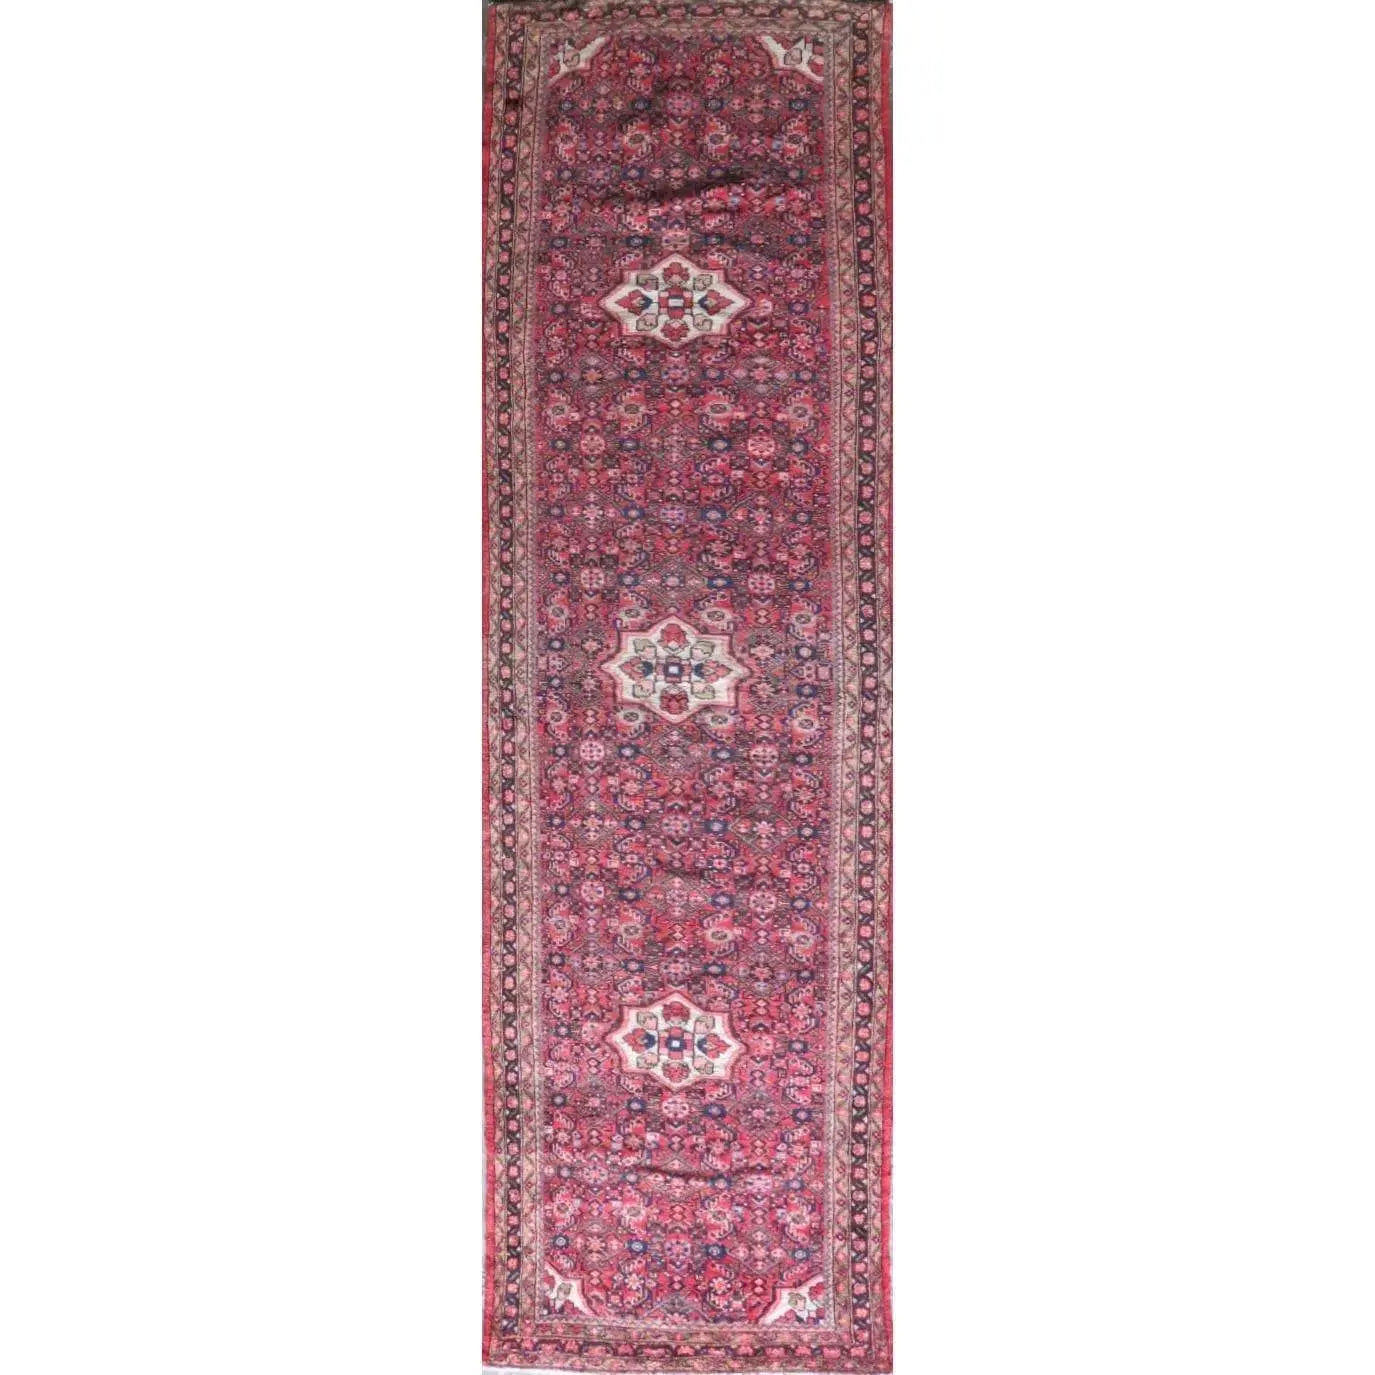 Hand-Knotted Persian Wool Rug _ Luxurious Vintage Design, 13'1" x 3'3", Artisan Crafted